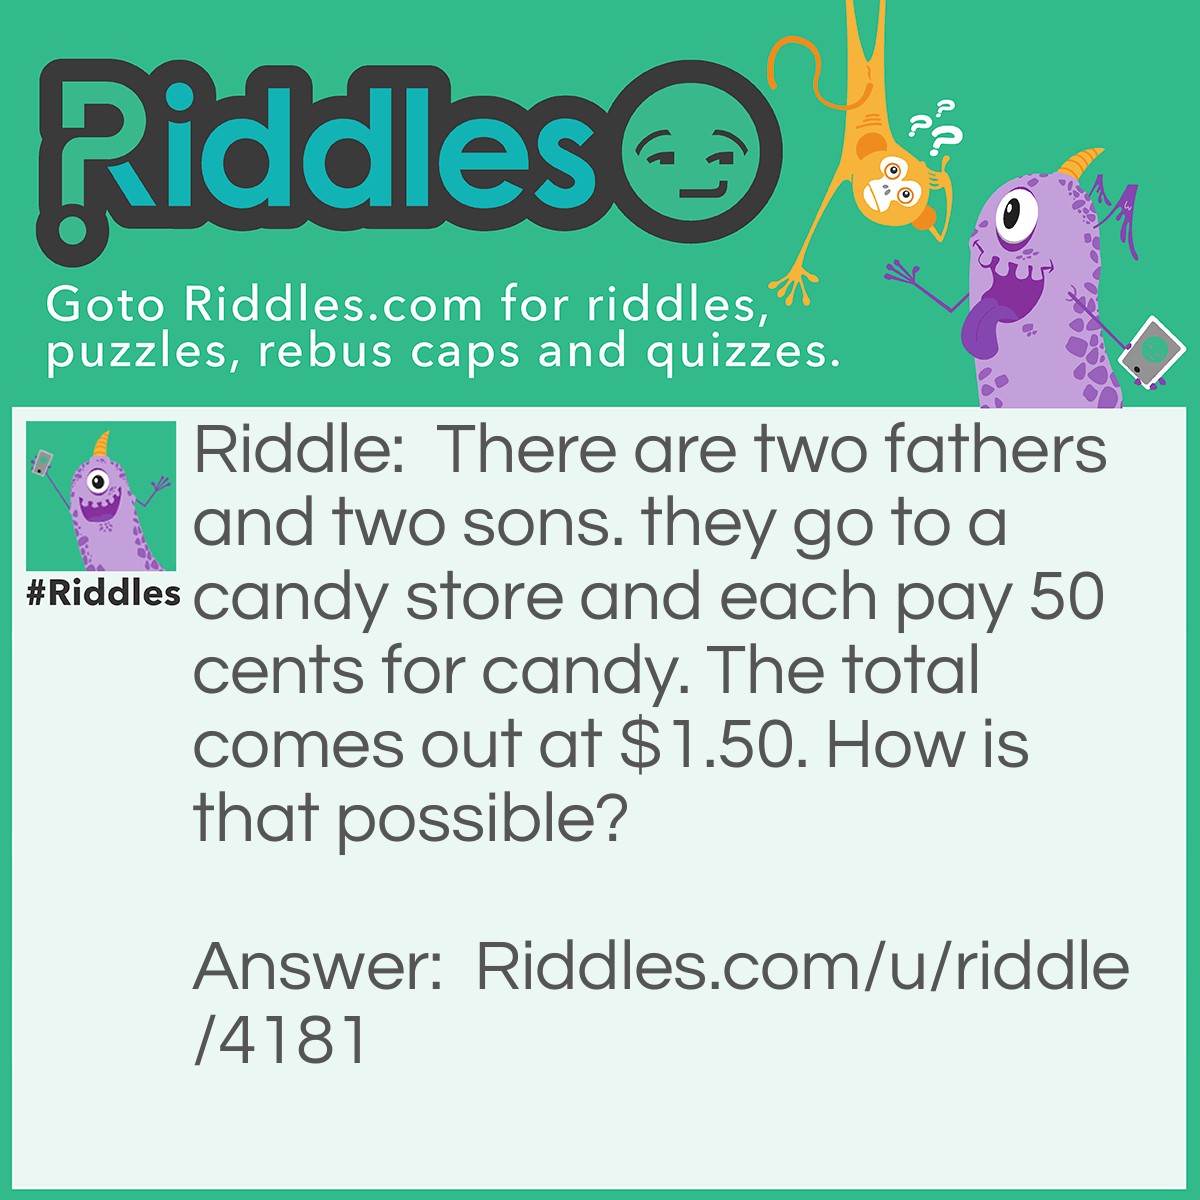 Riddle: There are two fathers and two sons. they go to a candy store and each pay 50 cents for candy. The total comes out at $1.50. How is that possible? Answer: There is a grandfather, father and child. The father is a father and a son of the grandfather, the child is just a son and the grandfather is just a father.